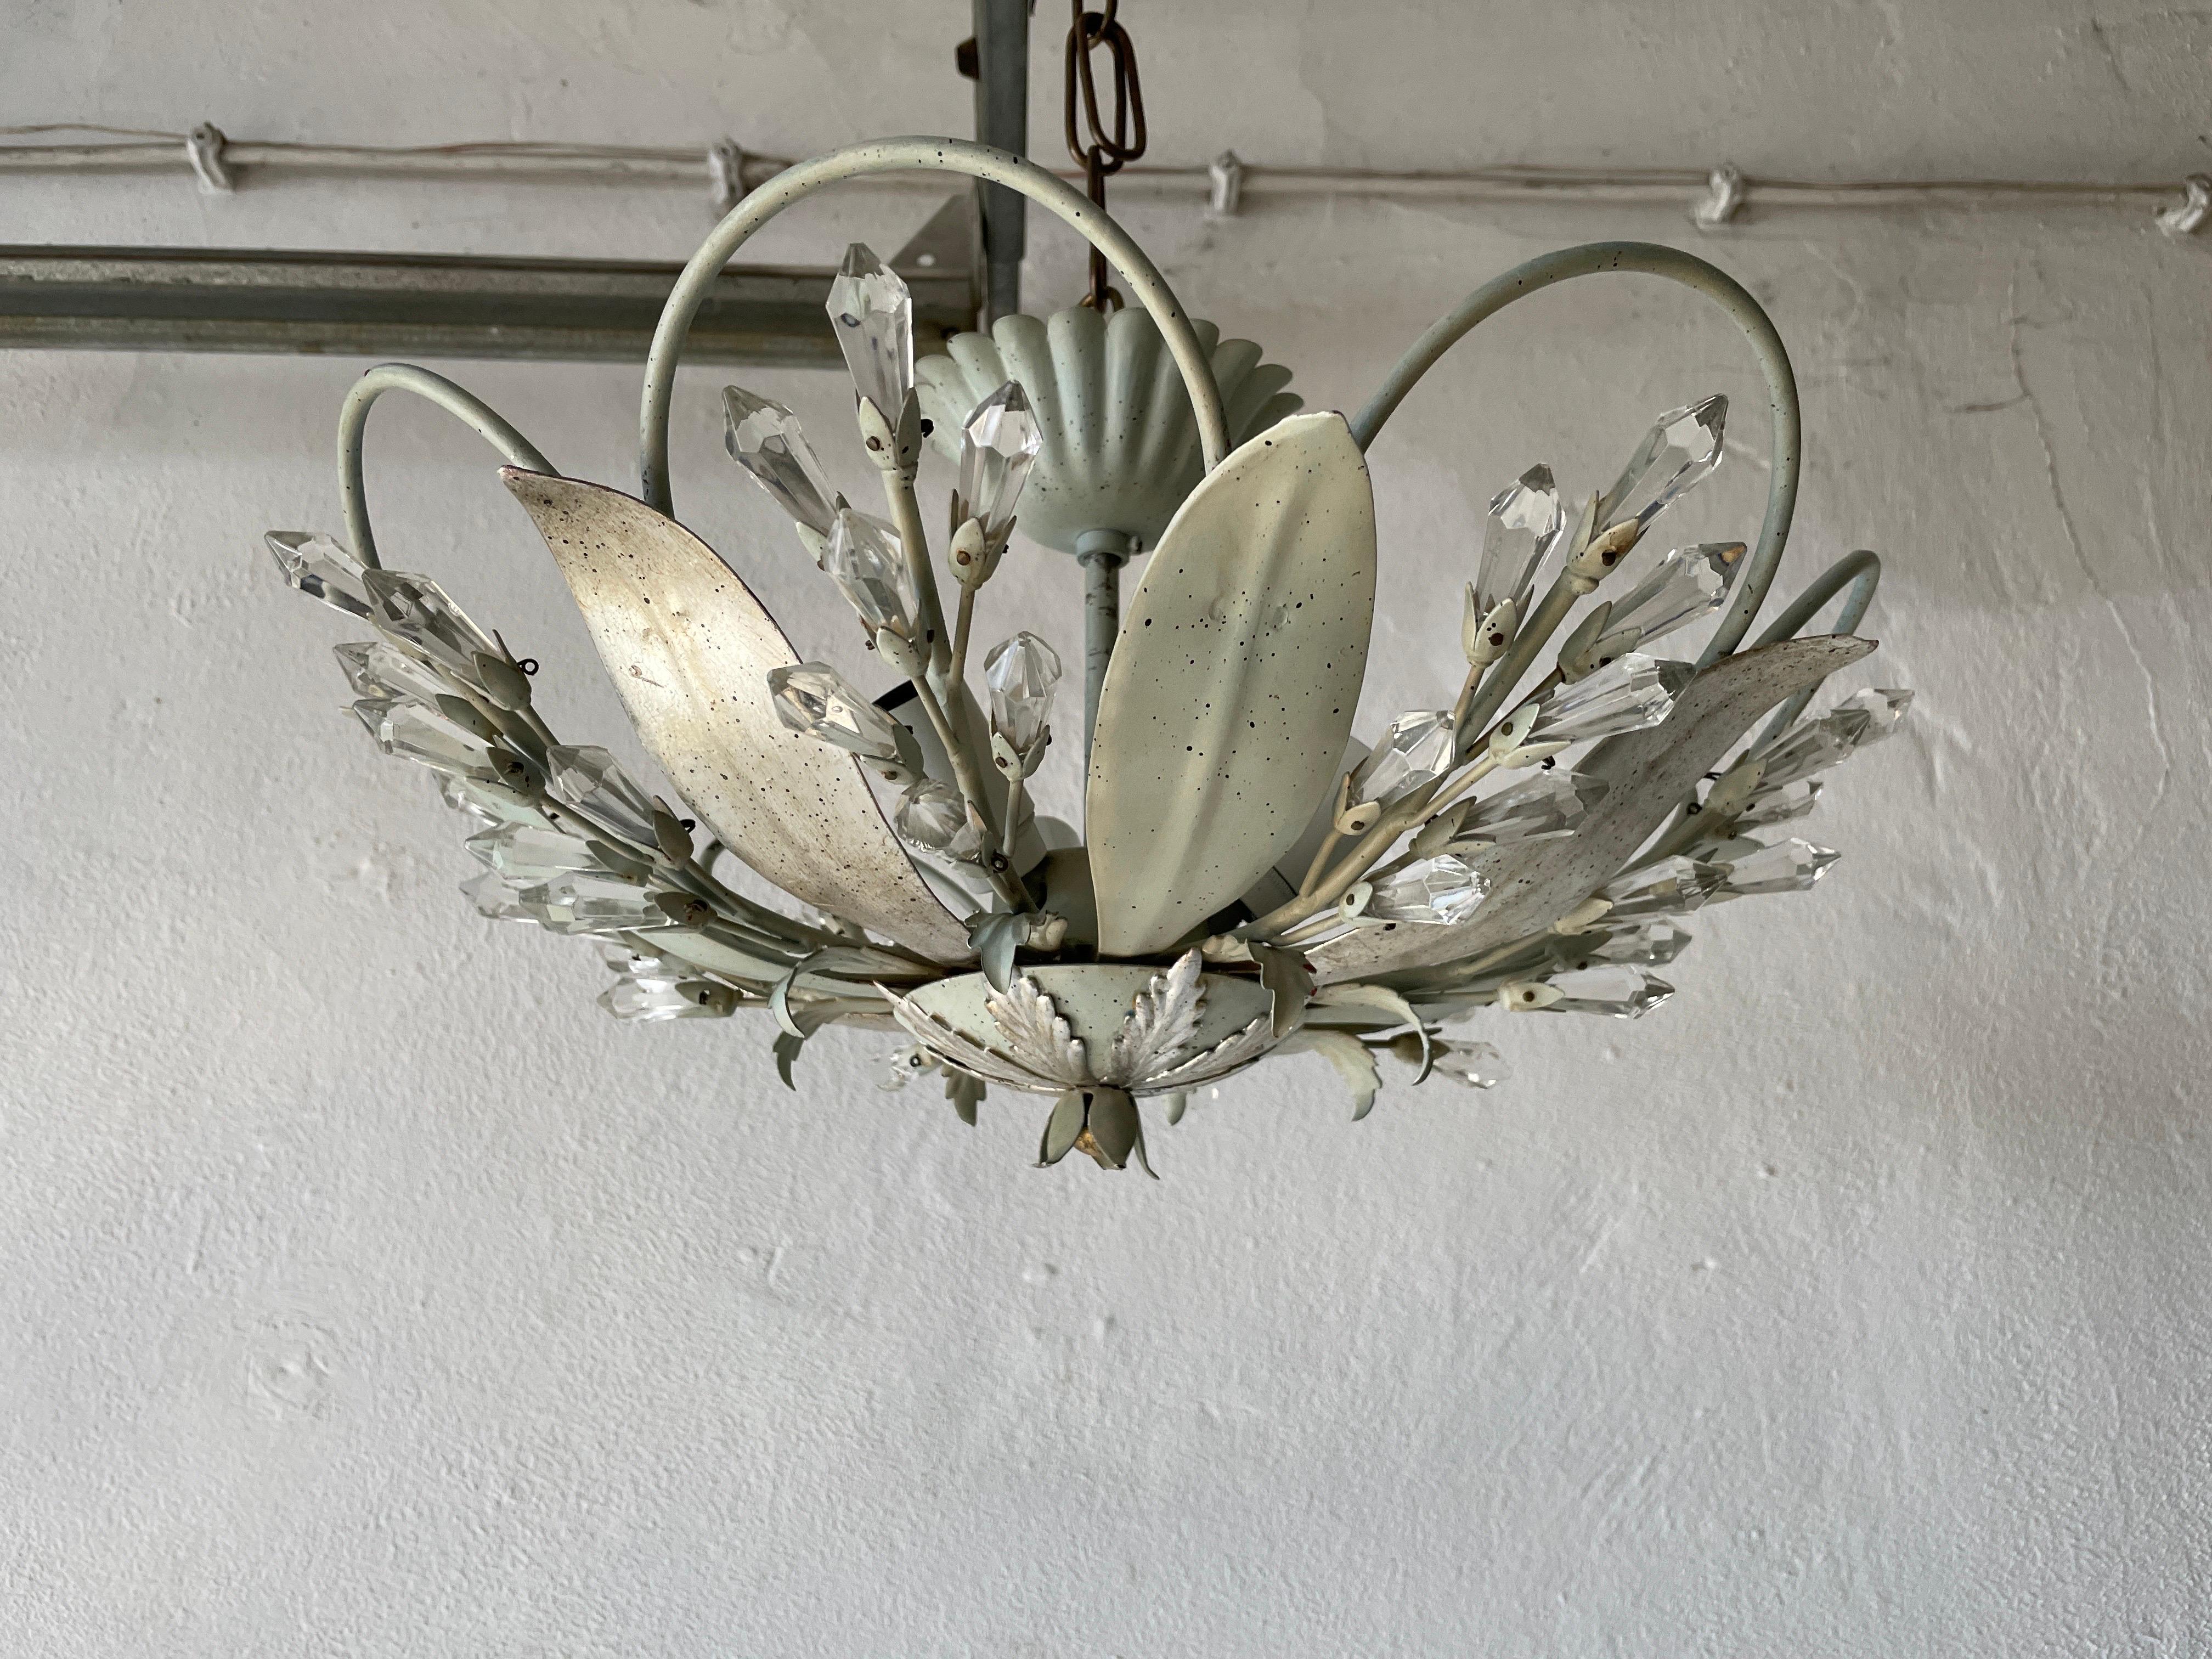 Flower Design Ceiling Lamp with Glass Ornaments, 1950s, Germany

Lampshade is in very good vintage condition.

This lamp works with 3x E14 light bulbs. 
Wired and suitable to use with 220V and 110V for all countries.

Measurements:
Diameter: